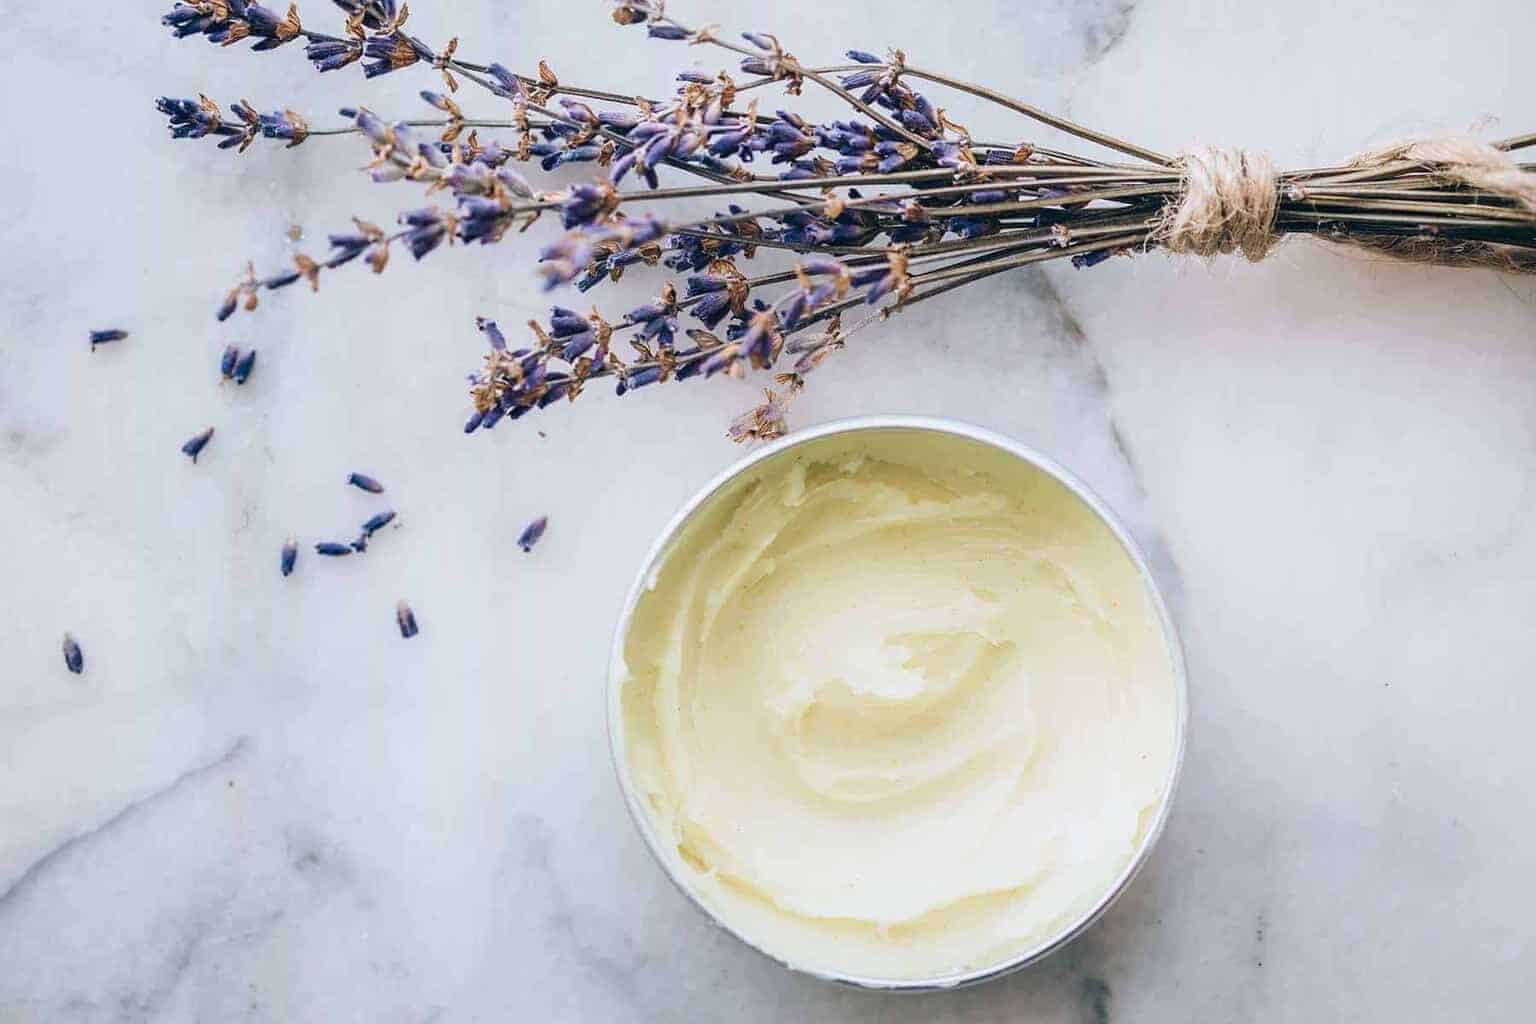 Use this DIY Neosporin salve recipe infused with lavender and calendula on those scrapes or cuts that are sure to walk in the door this summer.